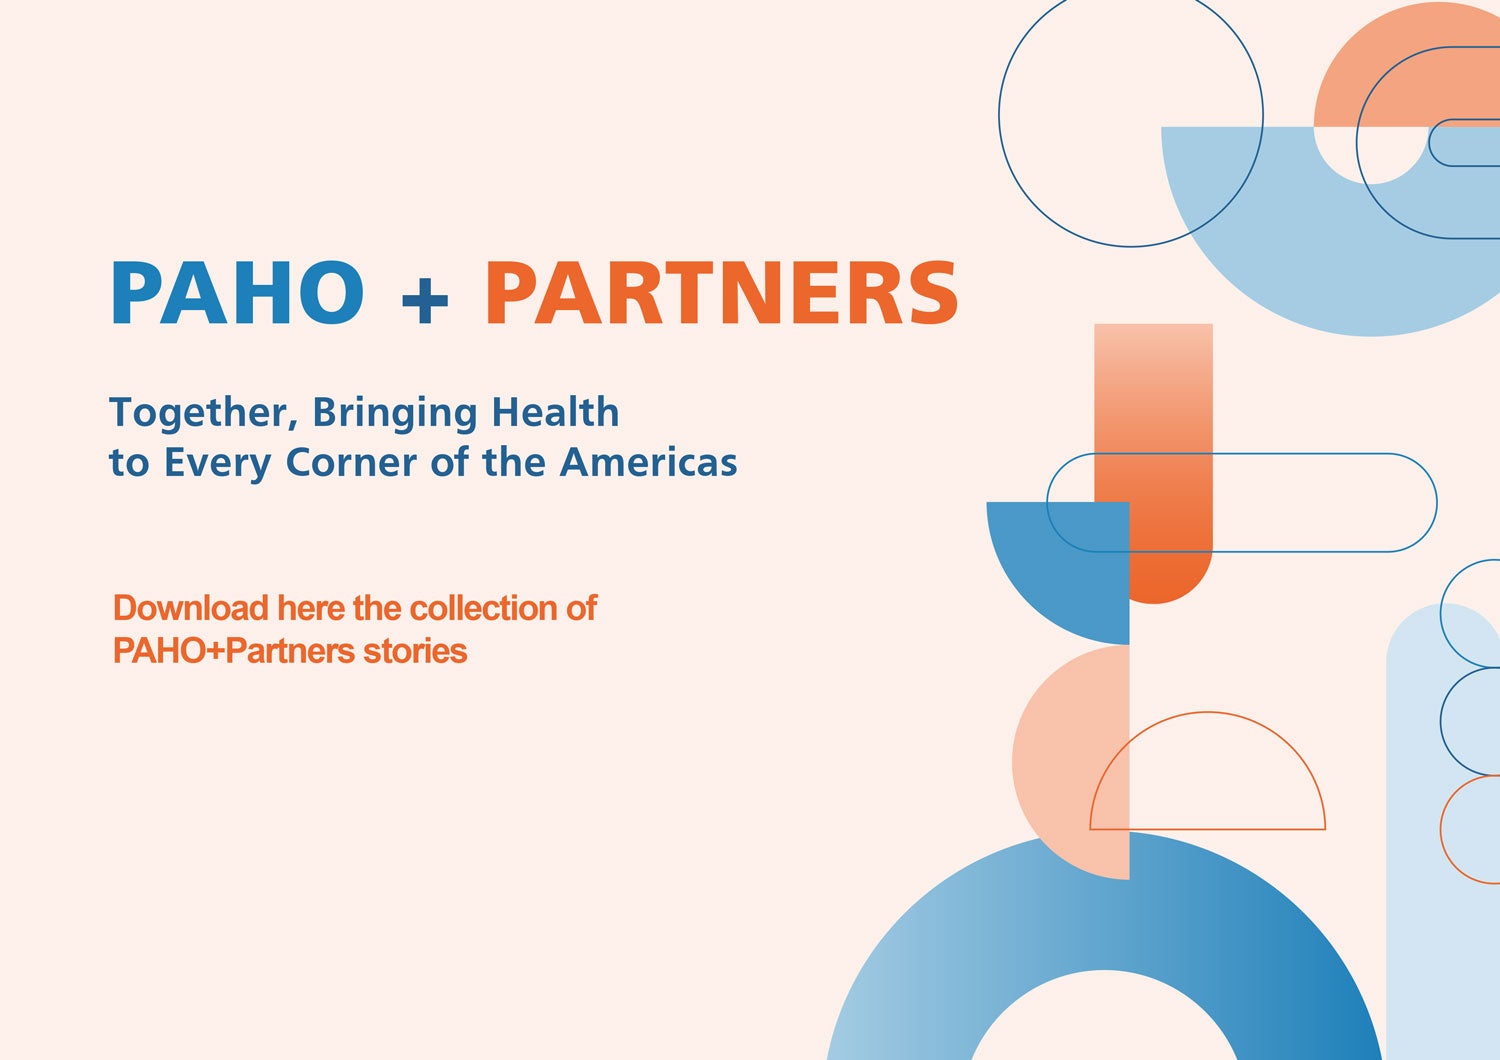 PAHO + Partners - Together, Bringing Health to Every Corner of the Americas